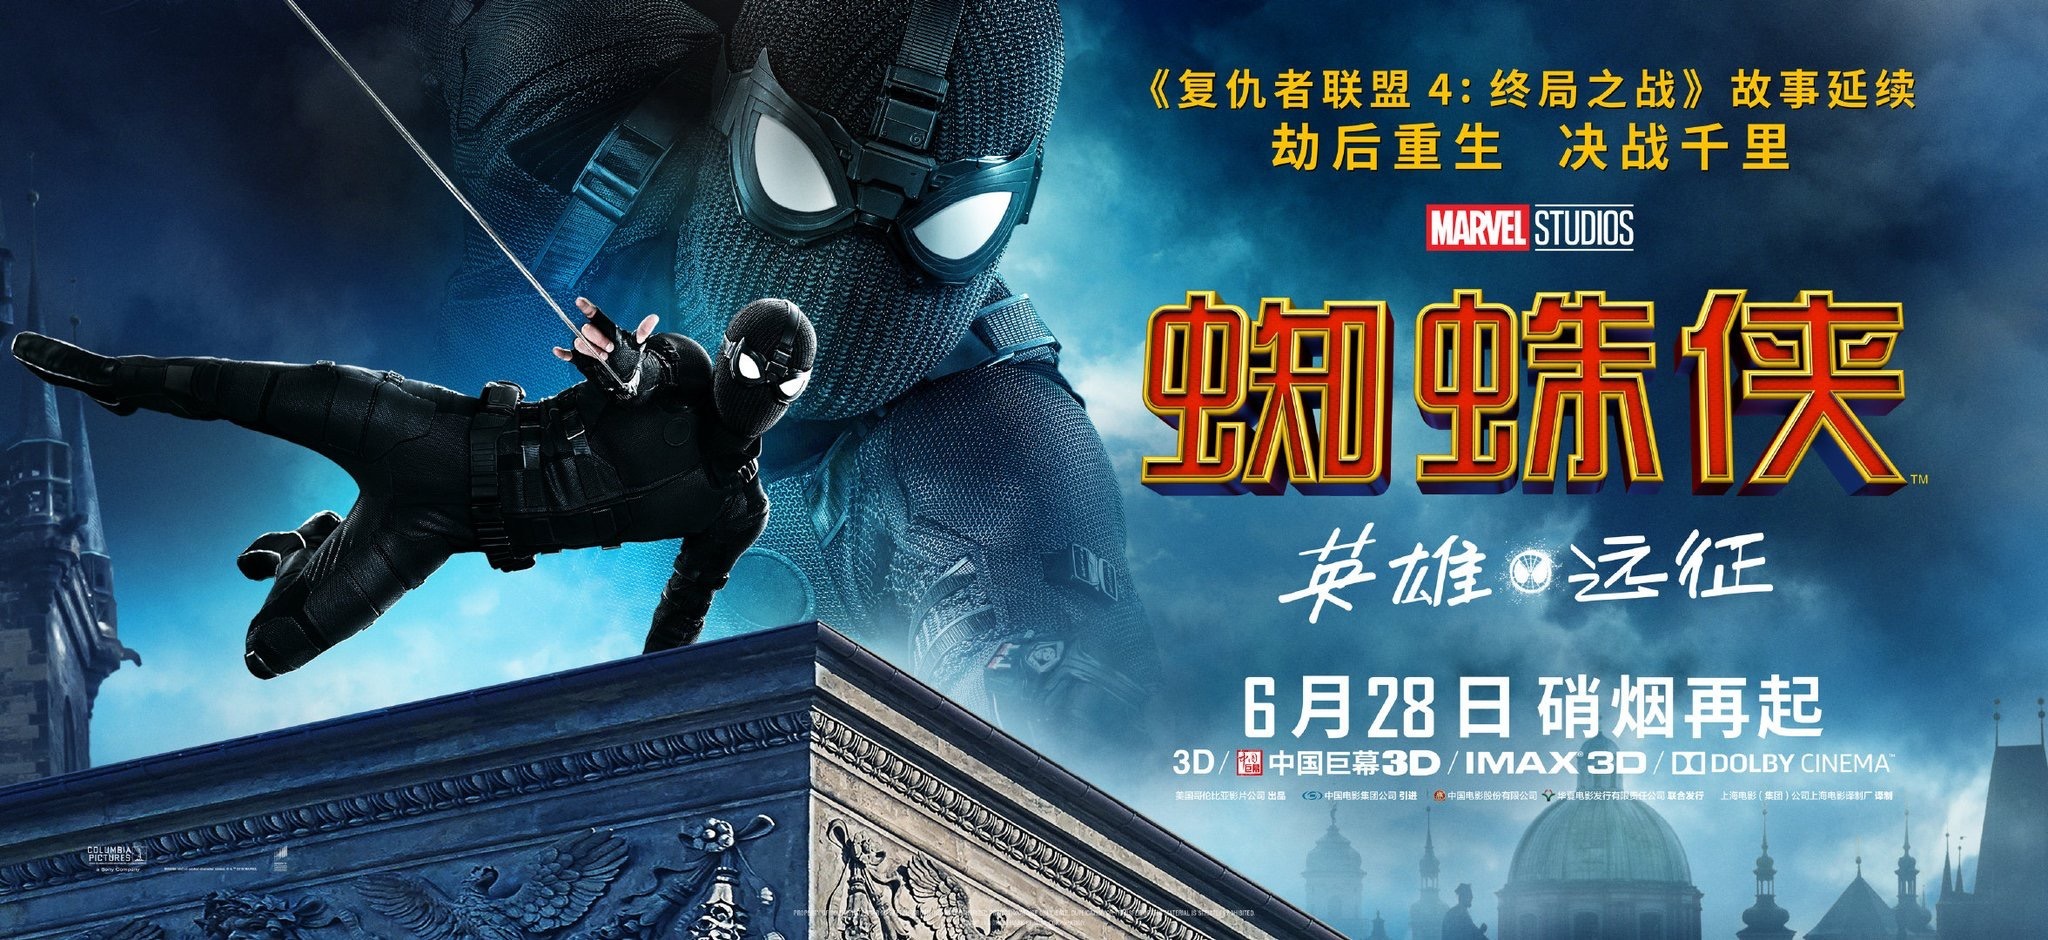 Mega Sized Movie Poster Image for Spider-Man: Far From Home (#16 of 35)